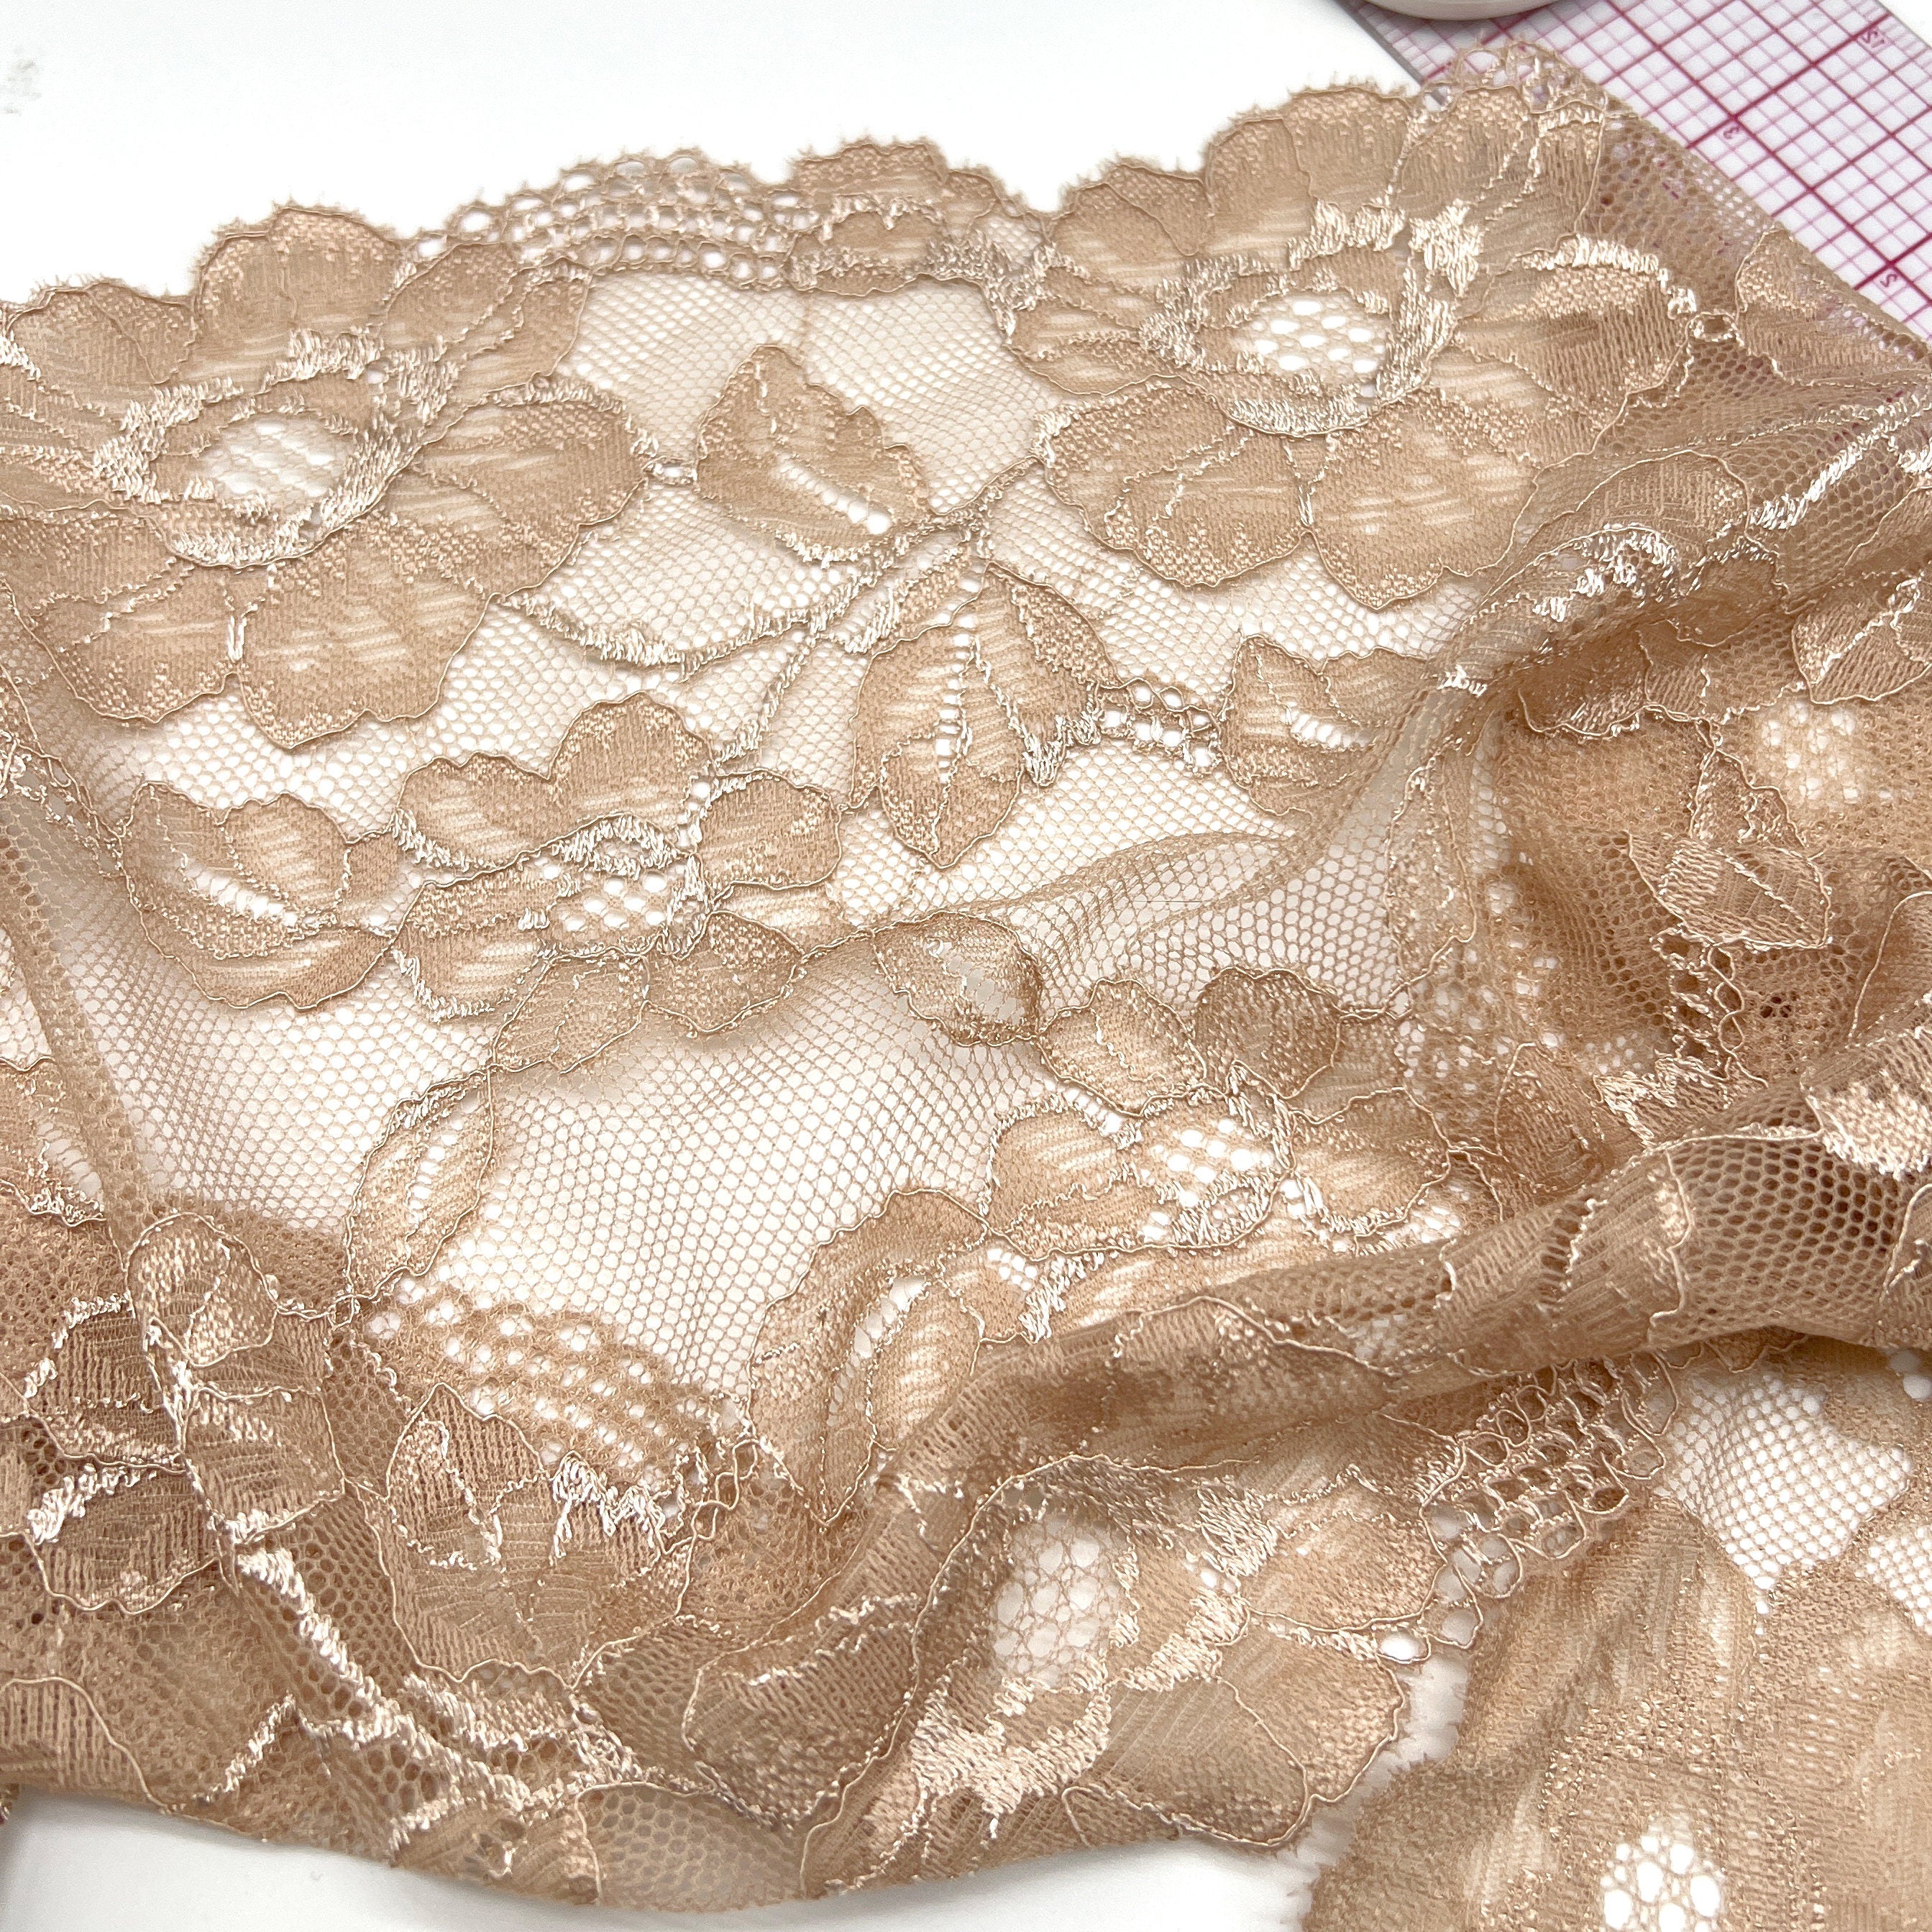 9" (23cm) Stretch Lace, Soft, High Quality in Beige, Pink, Turquoise and Gray- by the 1 yard - Stitch Love Studio